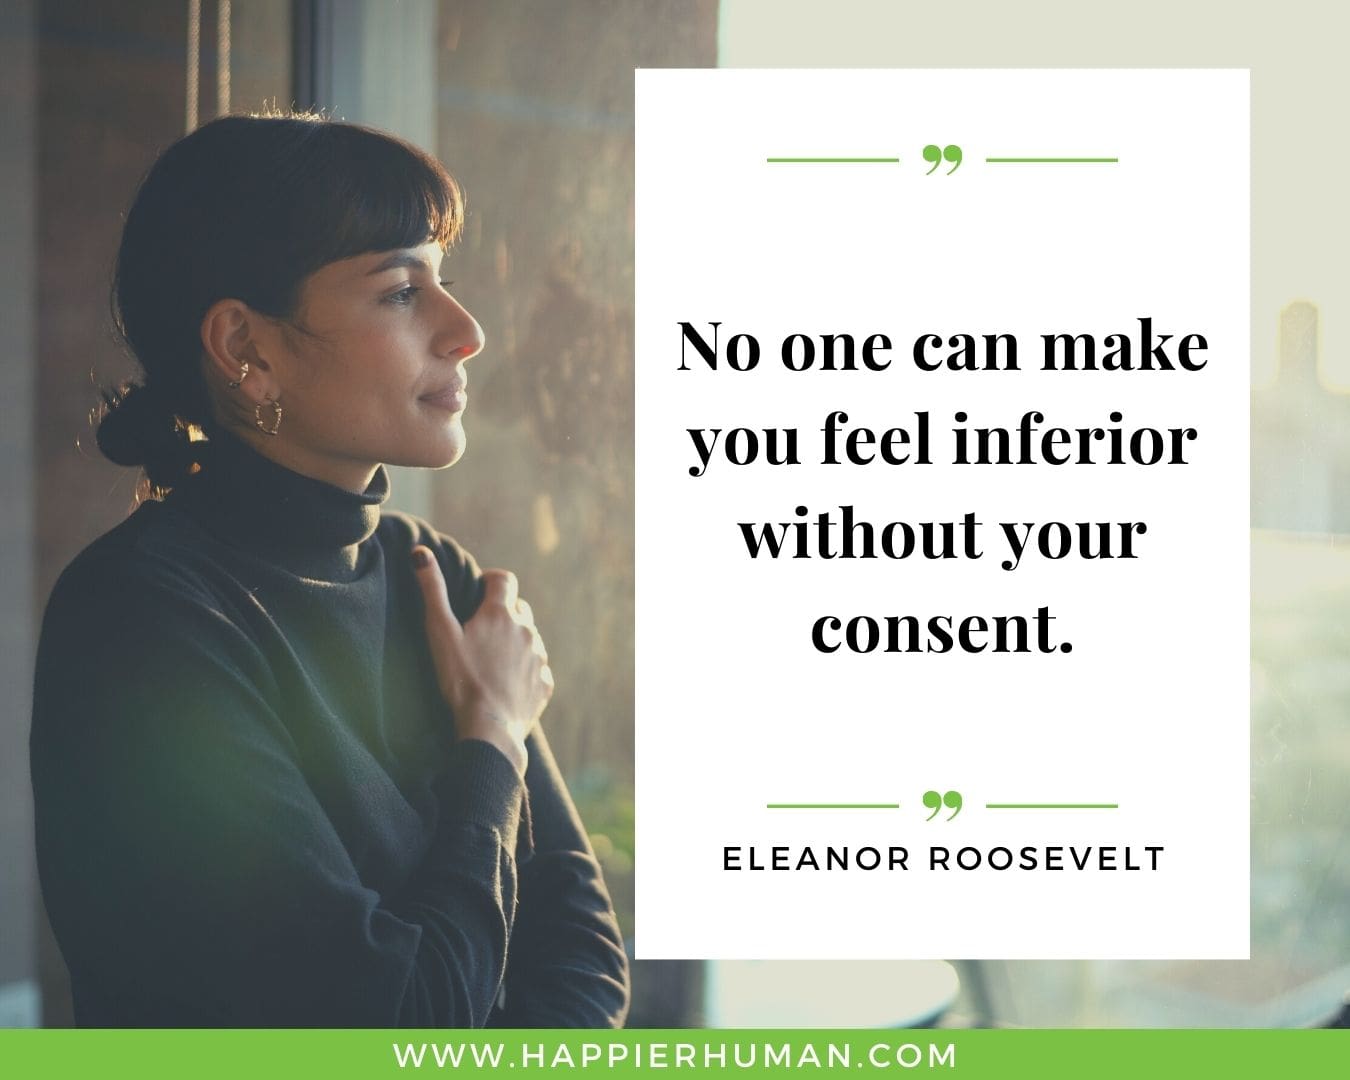 Haters Quotes - “No one can make you feel inferior without your consent.” - Eleanor Roosevelt